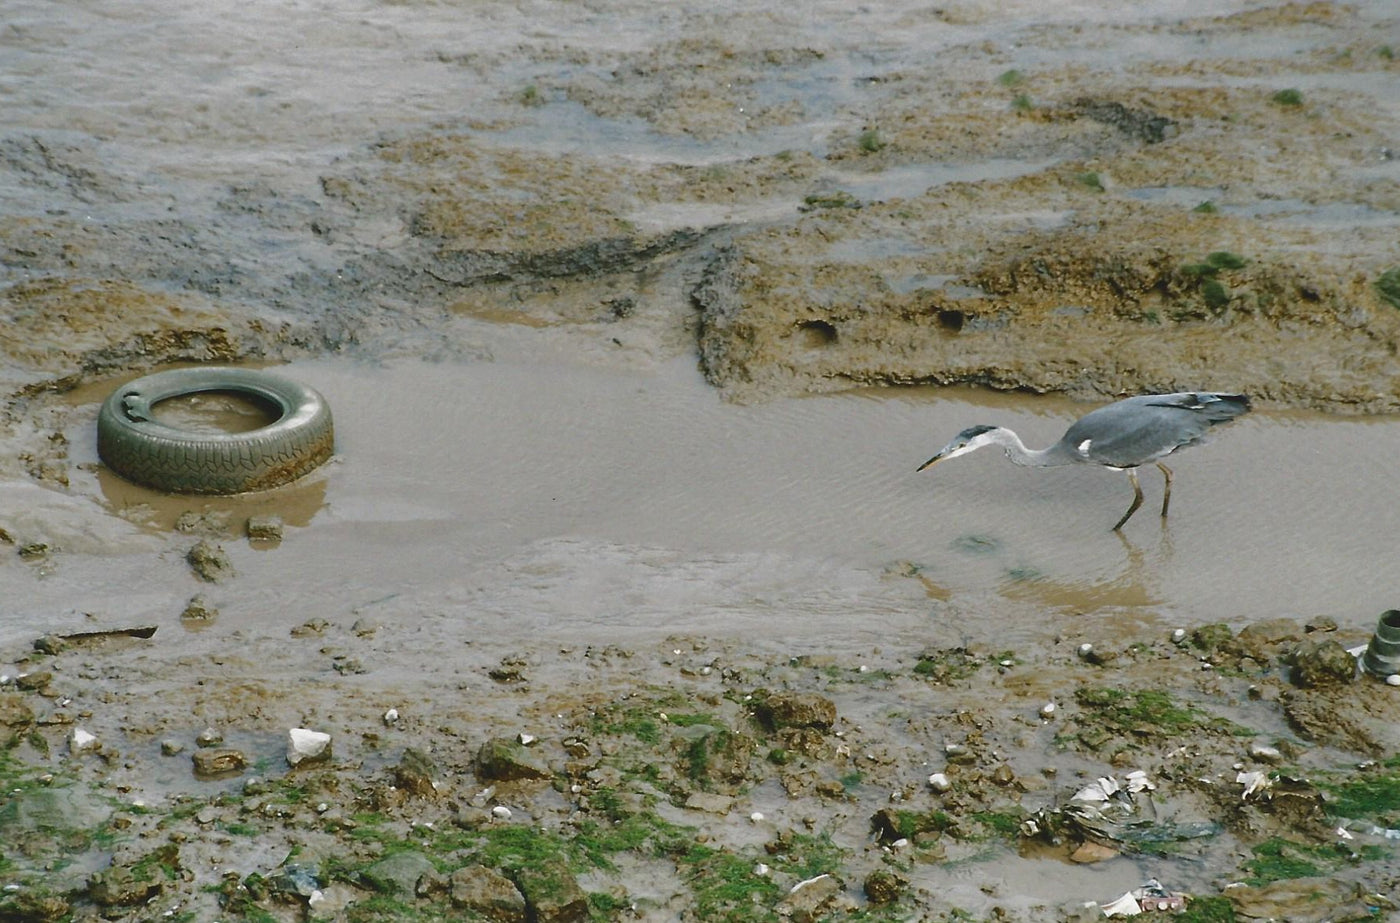 Heron and tyre photographed at East India Docks